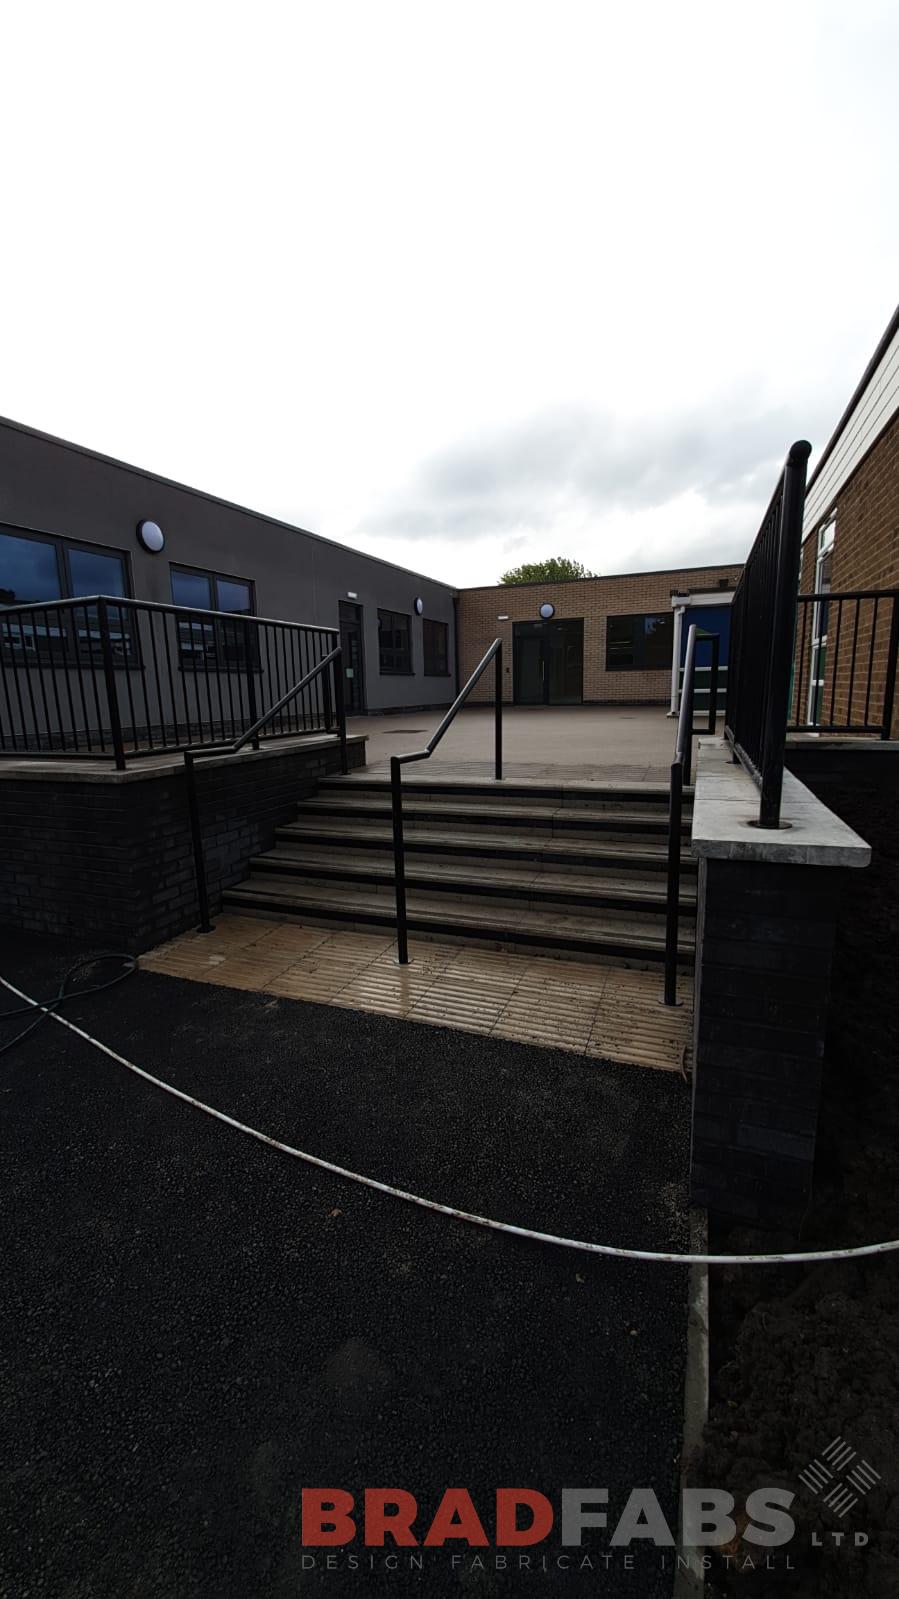 Bespoke railings and handrail by Bradfabs, a project for a school, manufactured in mild steel, galvanised and powder coated black